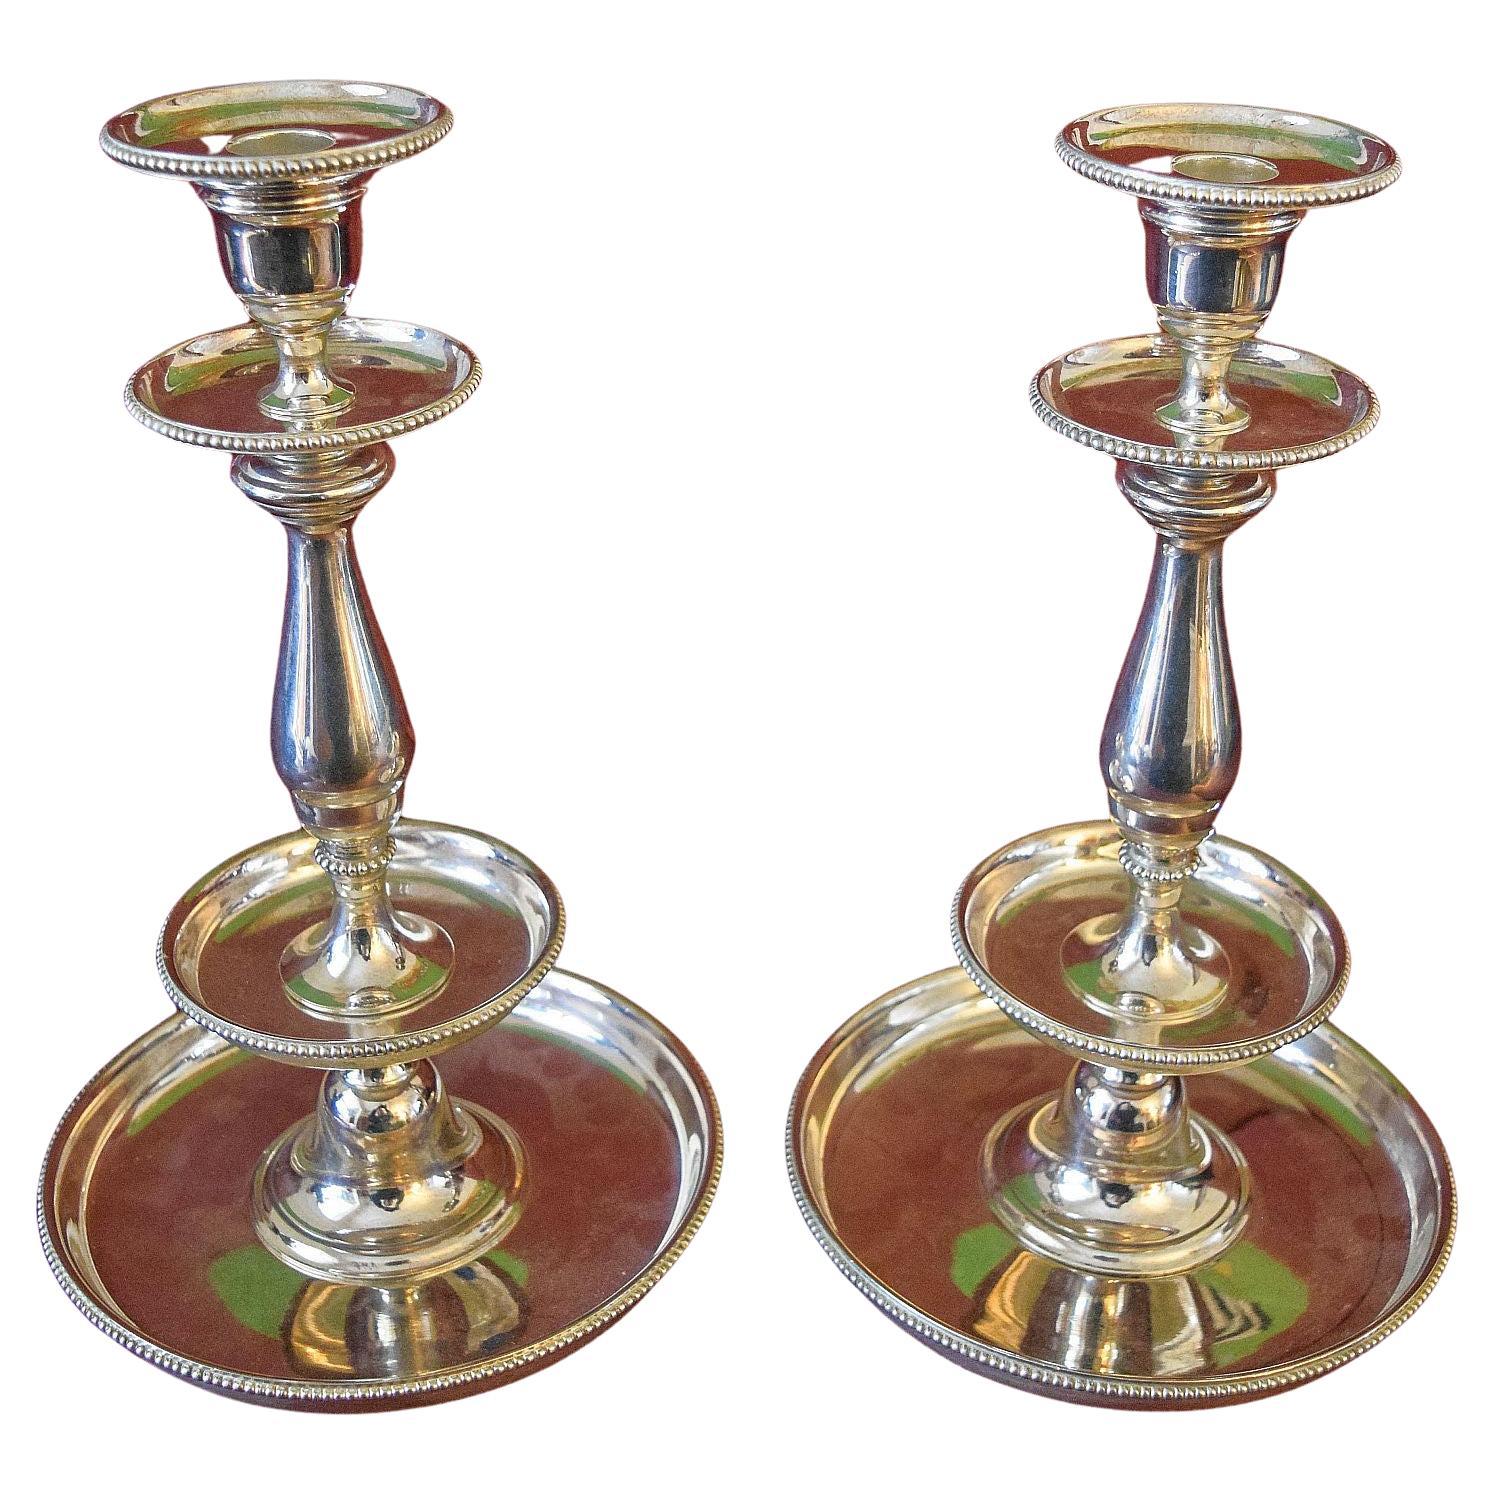 Christofle  A very fine and attractive pair of Antique candle sticks.Silverplate